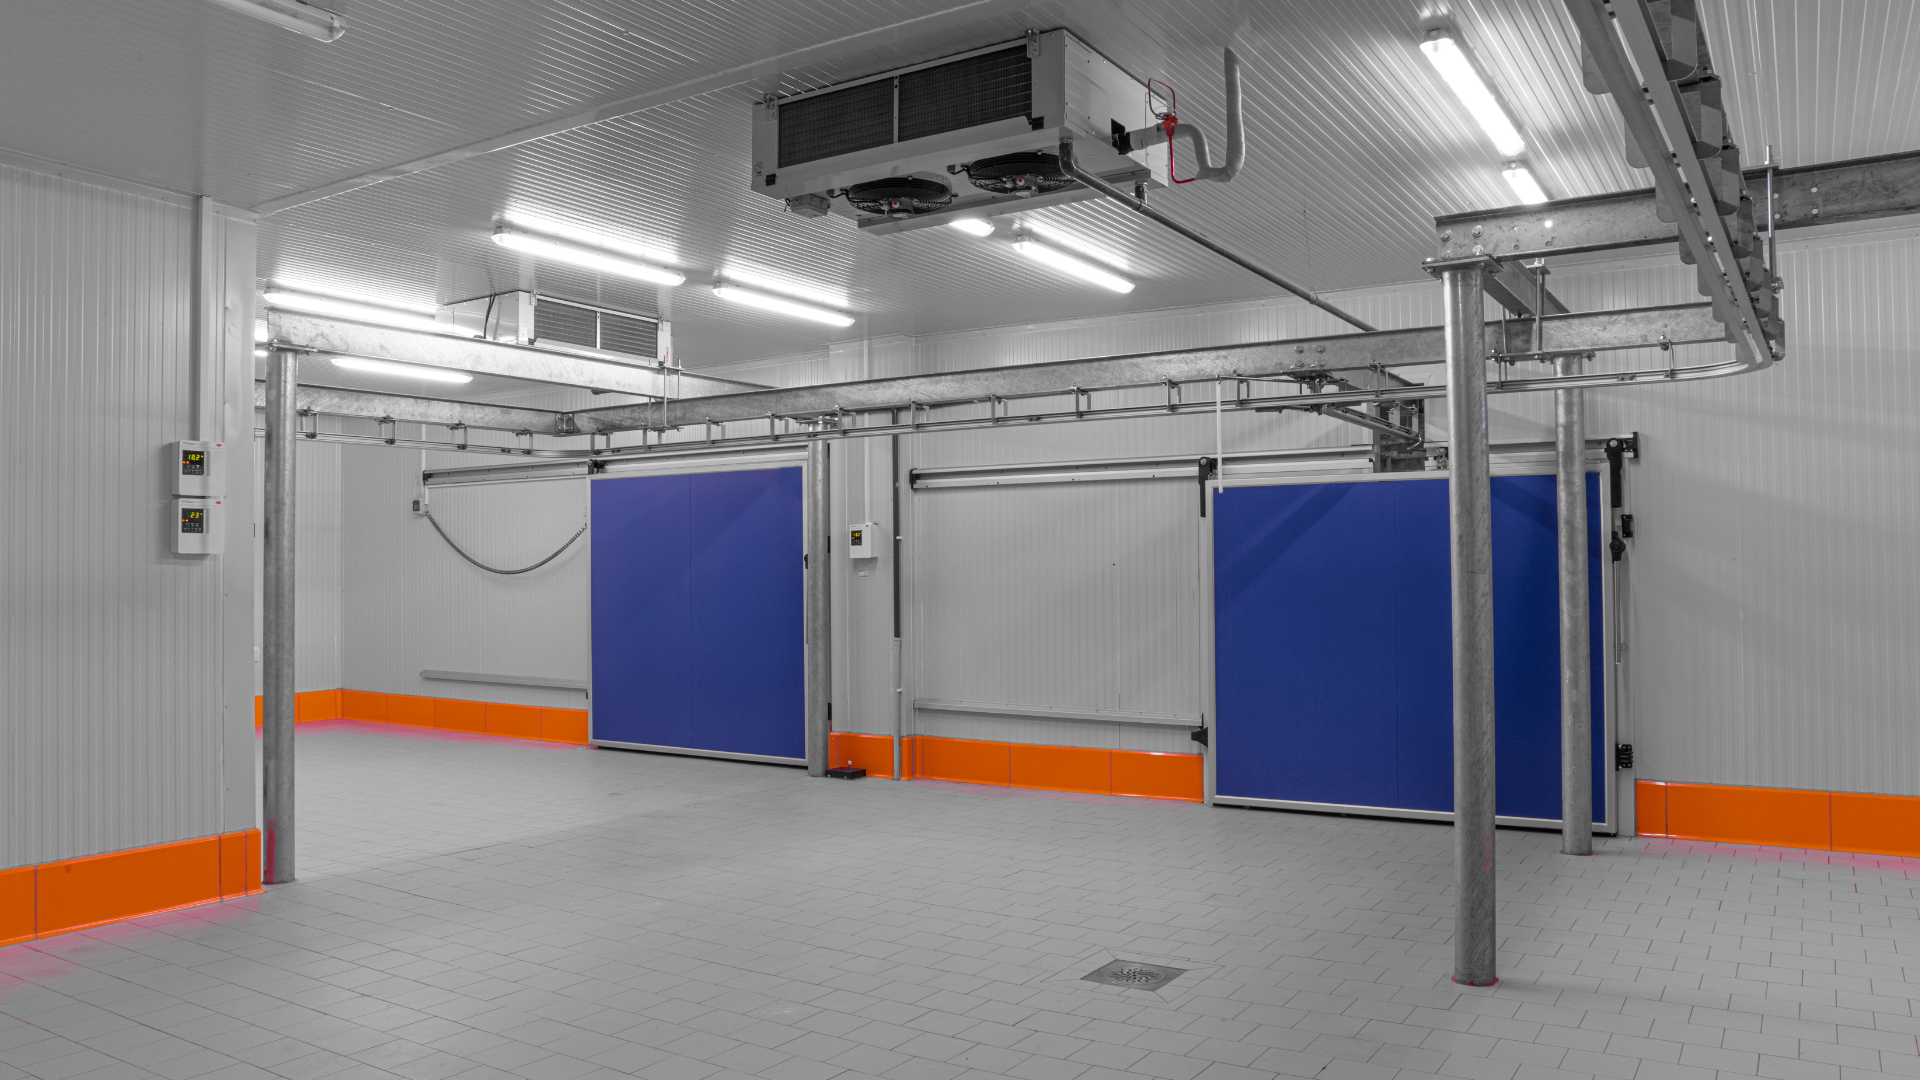 MEAN WELL VFD - Cold Room Refridgeration Applications use VFD's to reduce their energy expenditure